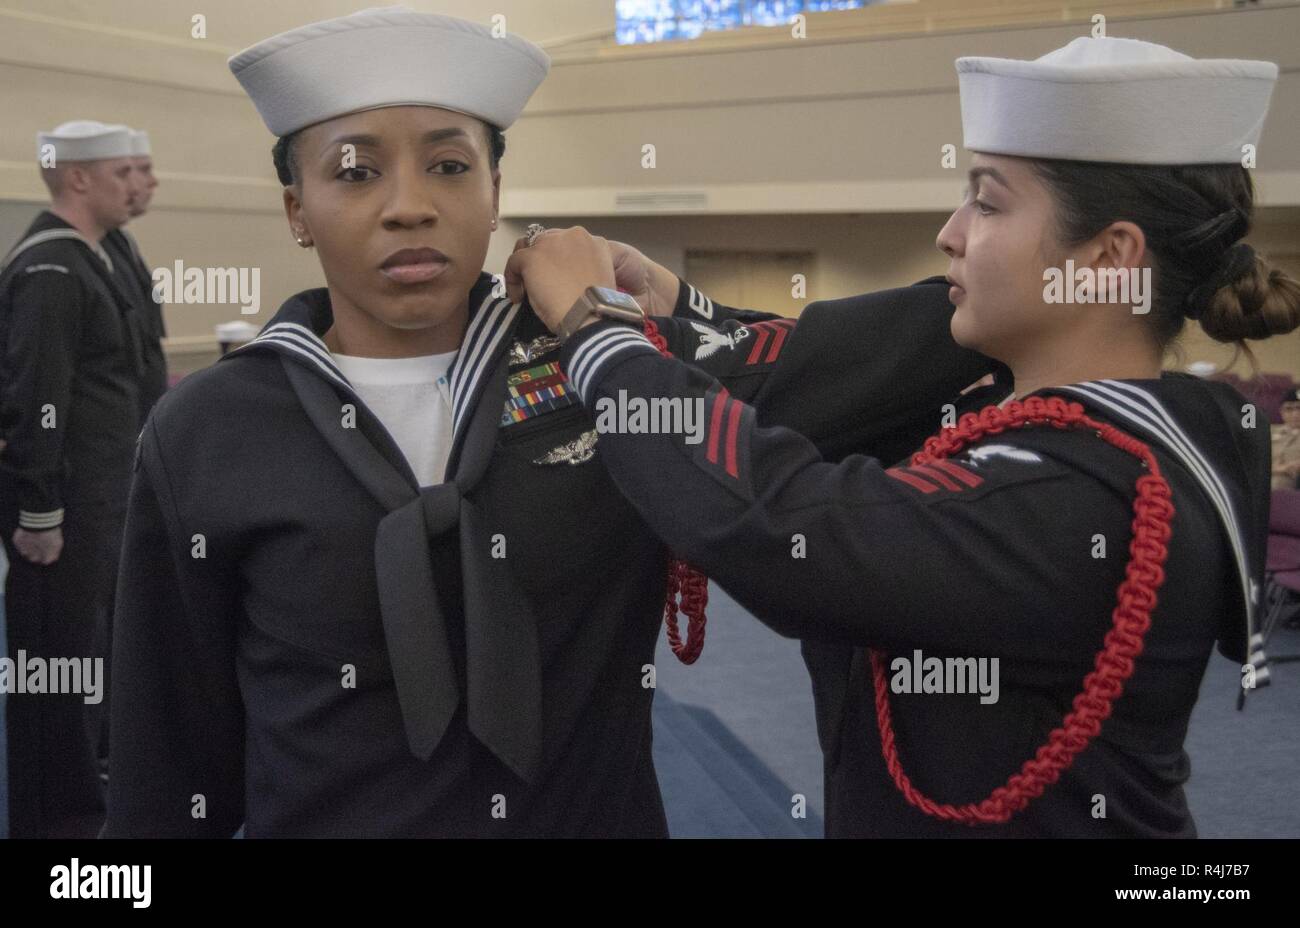 GREAT LAKES, Ill. (Nov. 1, 2018) Operations Specialist 1st Class Ranette Brown receives her recruit division commander (RDC) aiguillette, commonly referred to as a 'red rope,' during an RDC 'C' School graduation ceremony inside the Recruit Memorial Chapel at Recruit Training Command. More than 30,000 recruits graduate annually from the Navy's only boot camp. Stock Photo